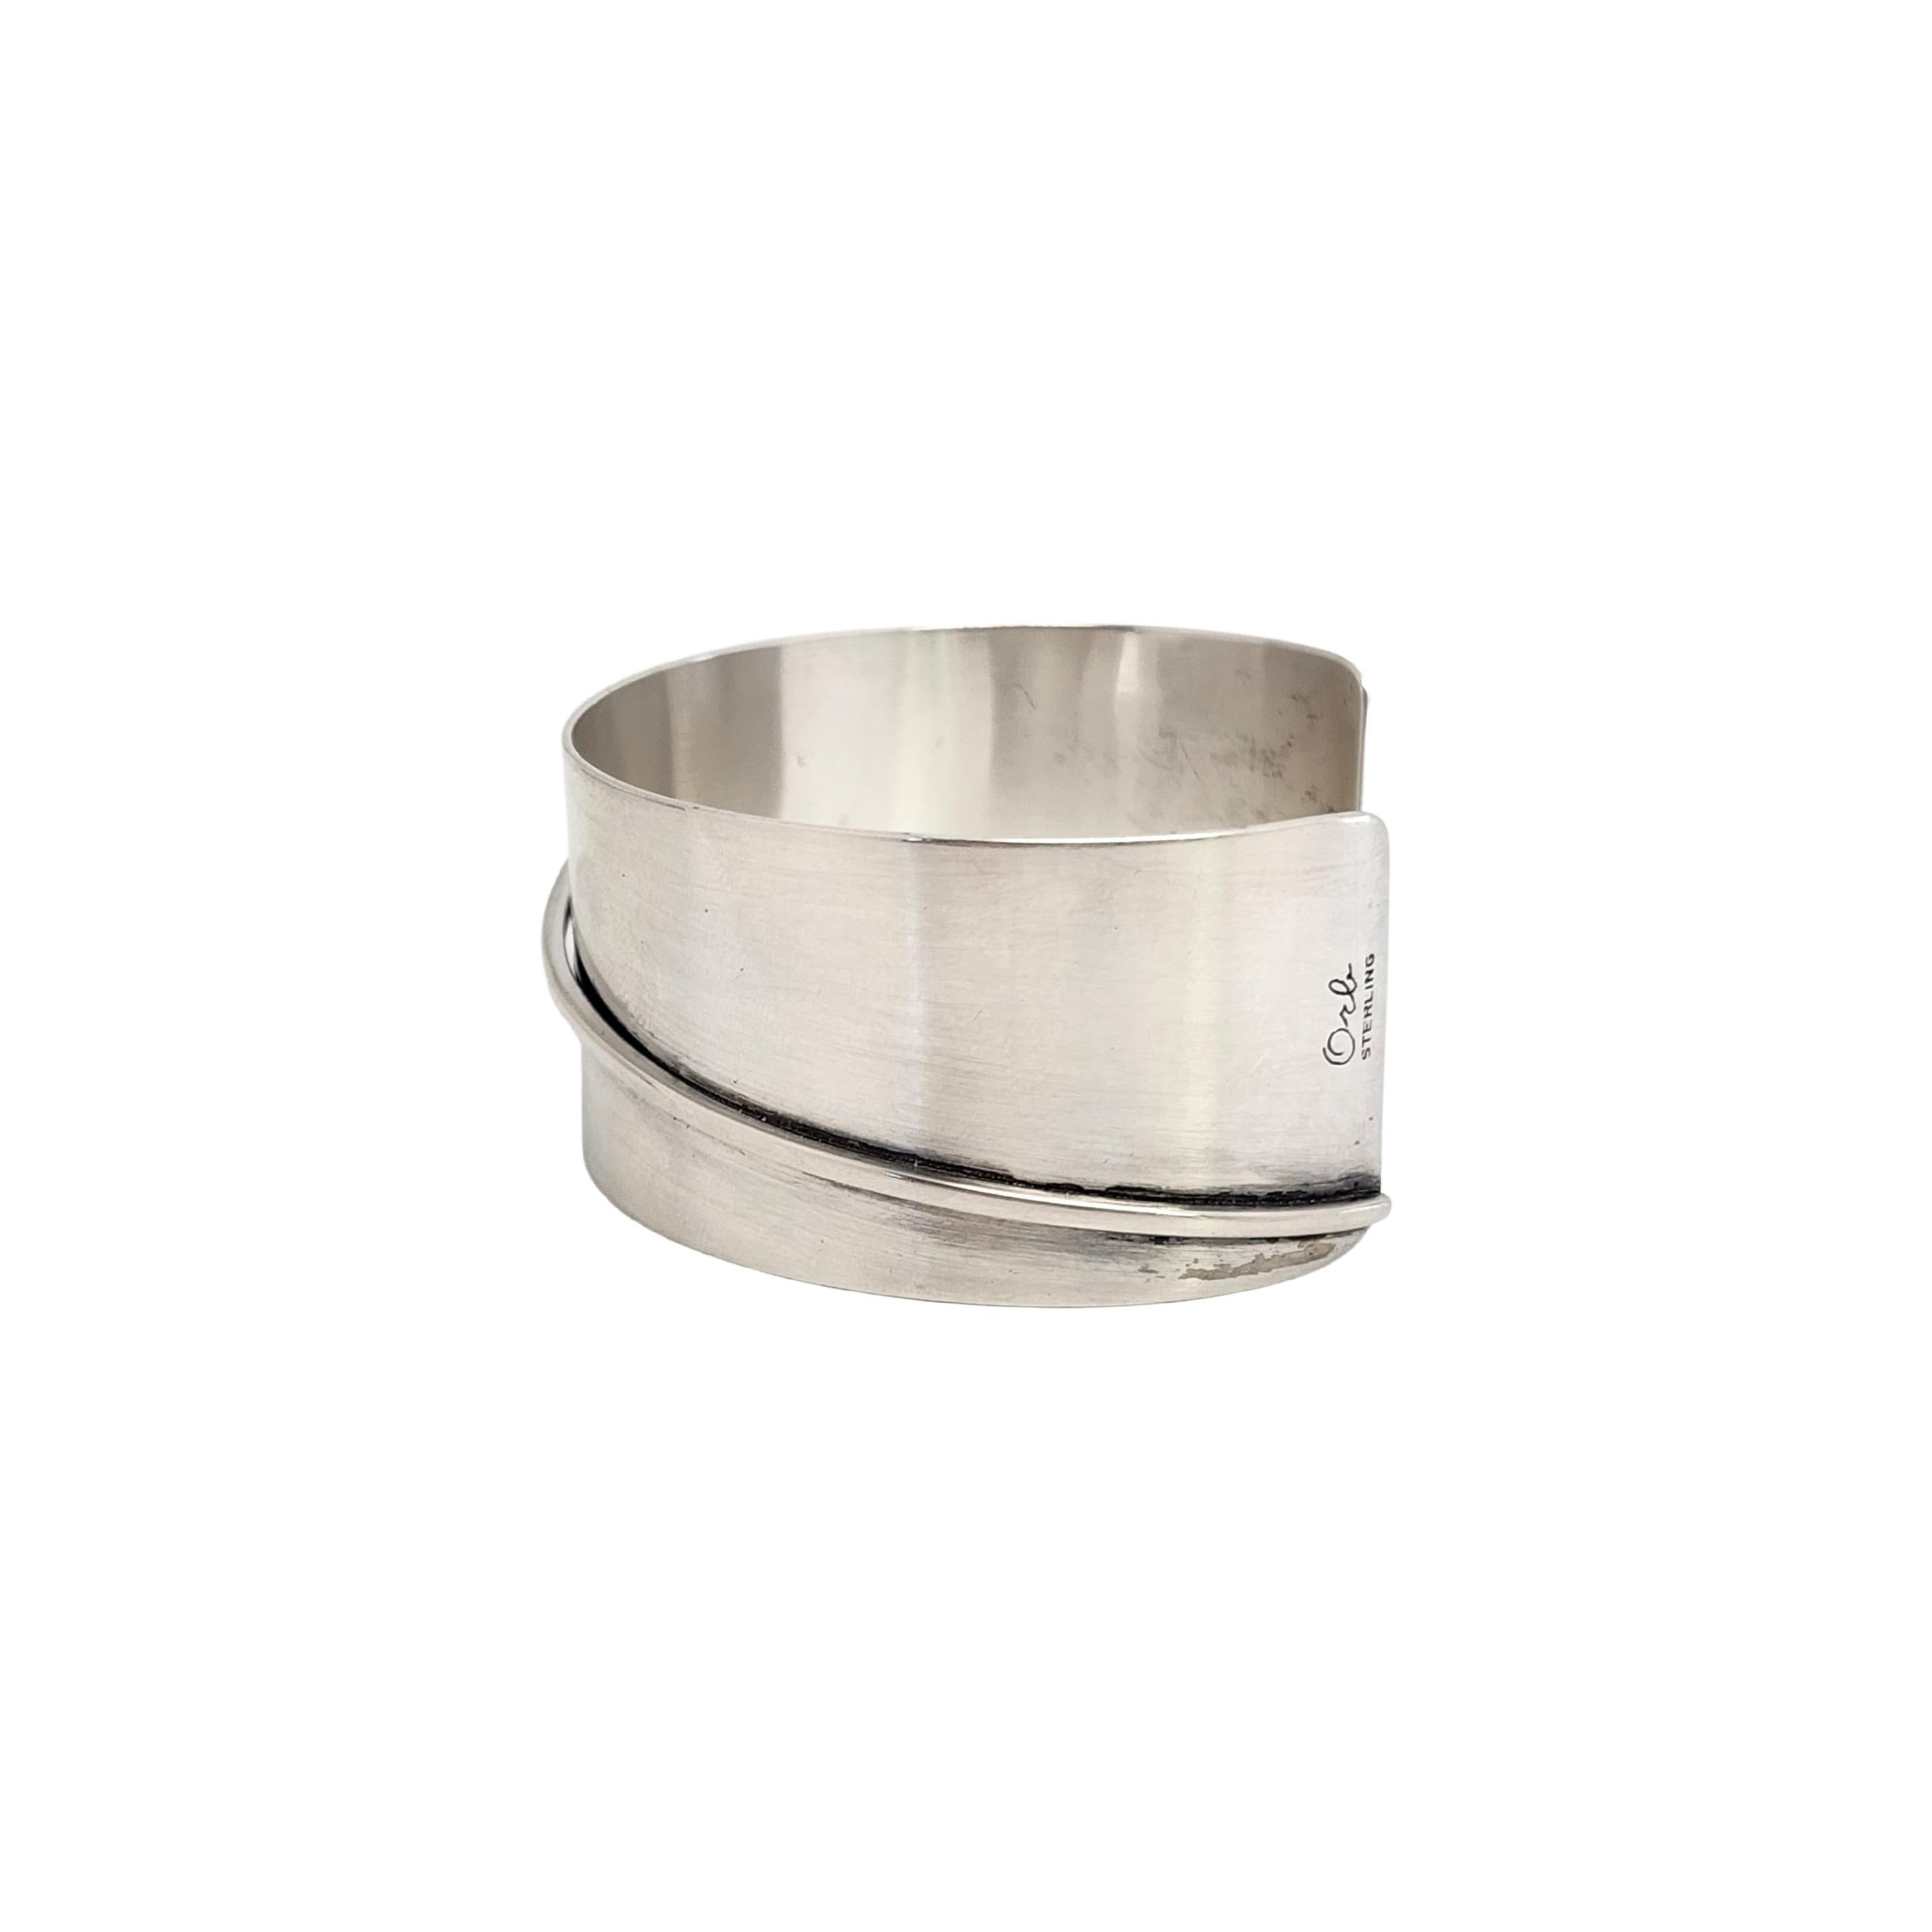 Sterling silver modern design cuff bracelet by Orb, Otto Robert Bade.

Beautiful modernist design cuff bracelet featuring an applied corner to corner thick wire.

Measures approx 5 3/4